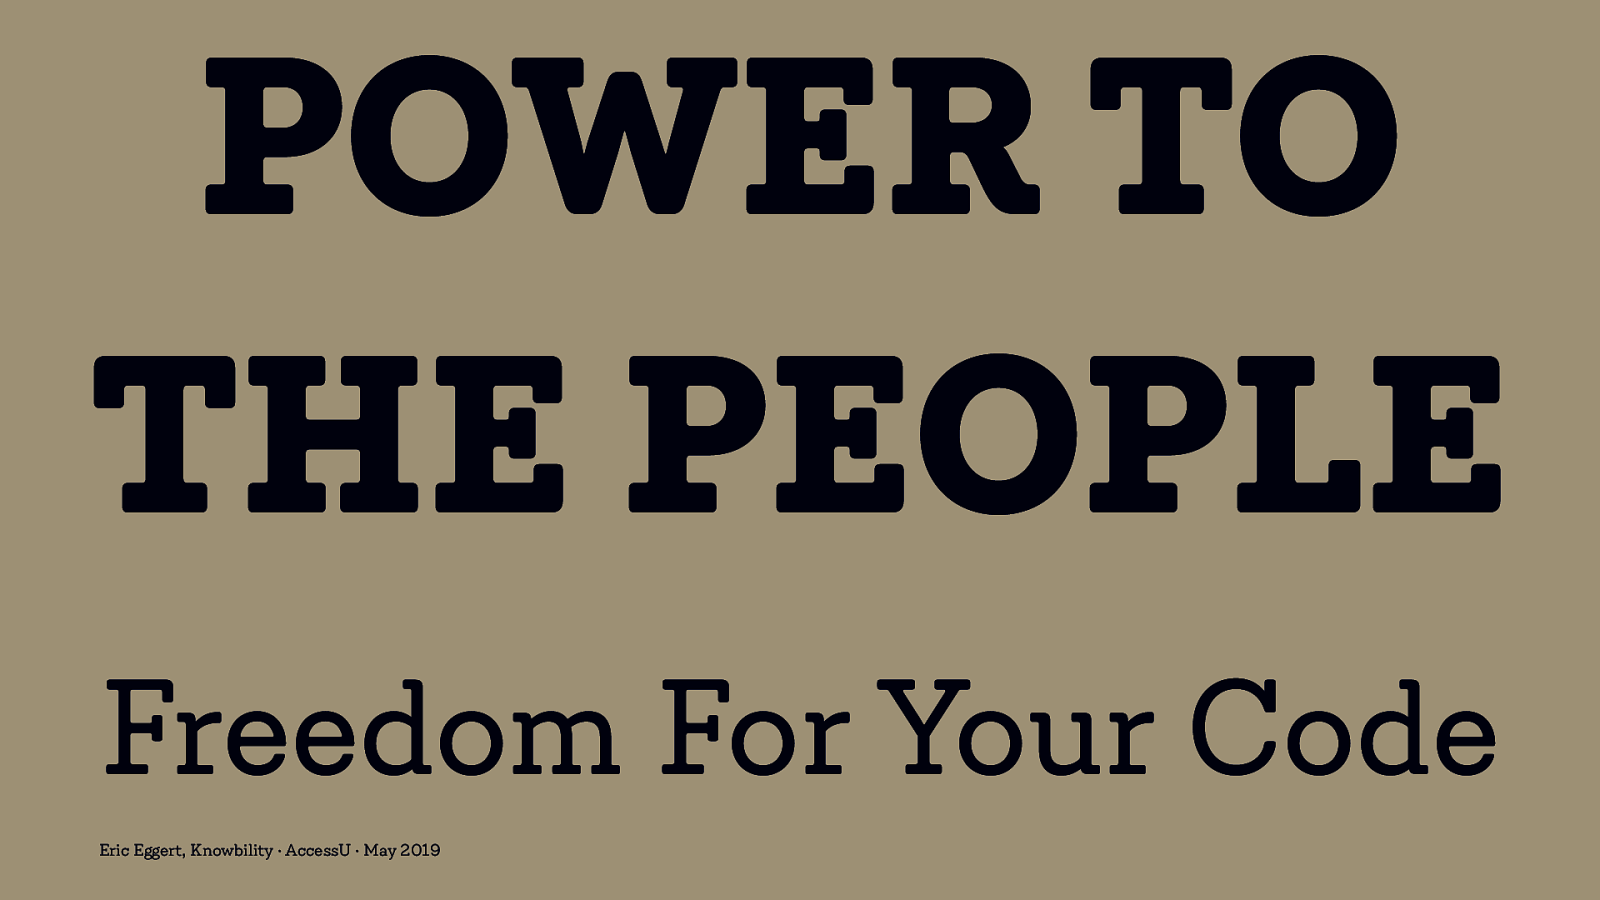 Power to the people, freedom for your code